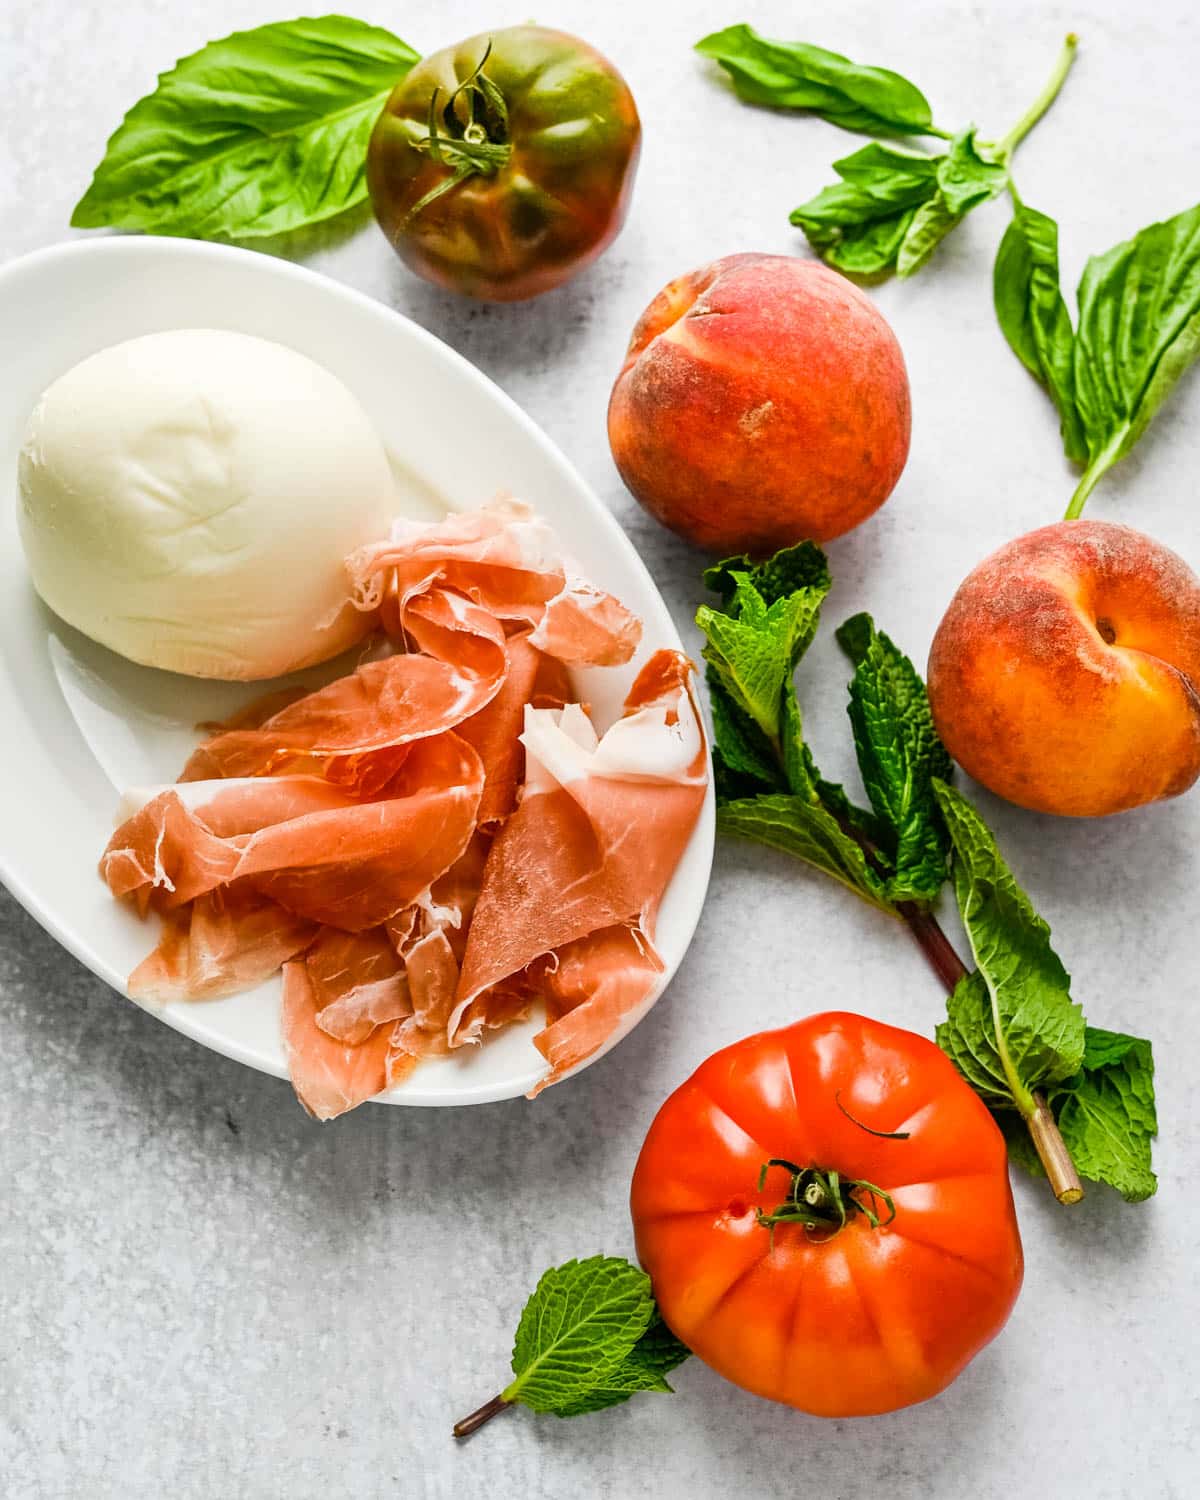 Ingredients for the caprese salad.